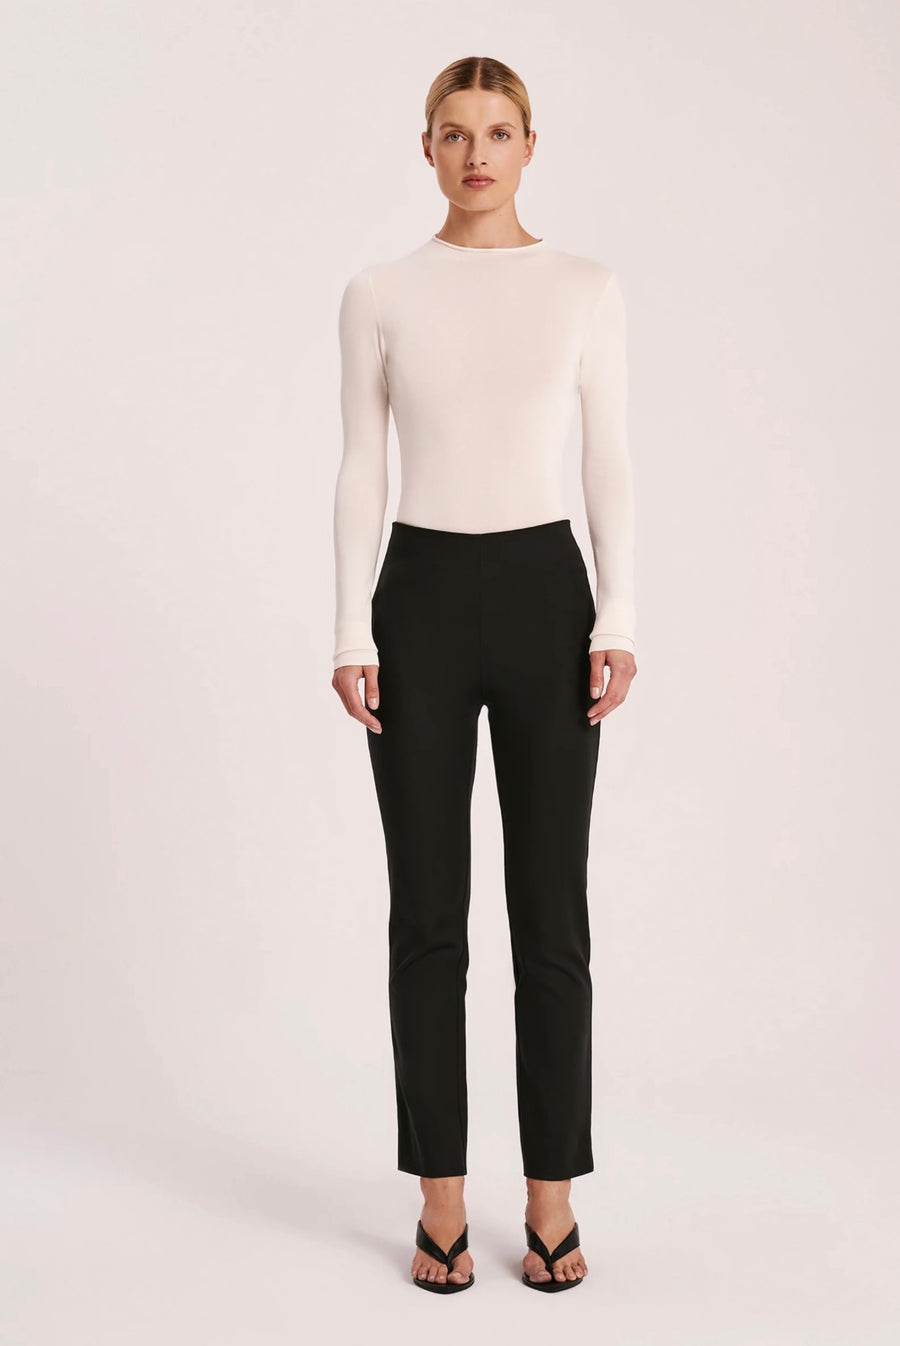 Nude Lucy II DELYSE Pant - black